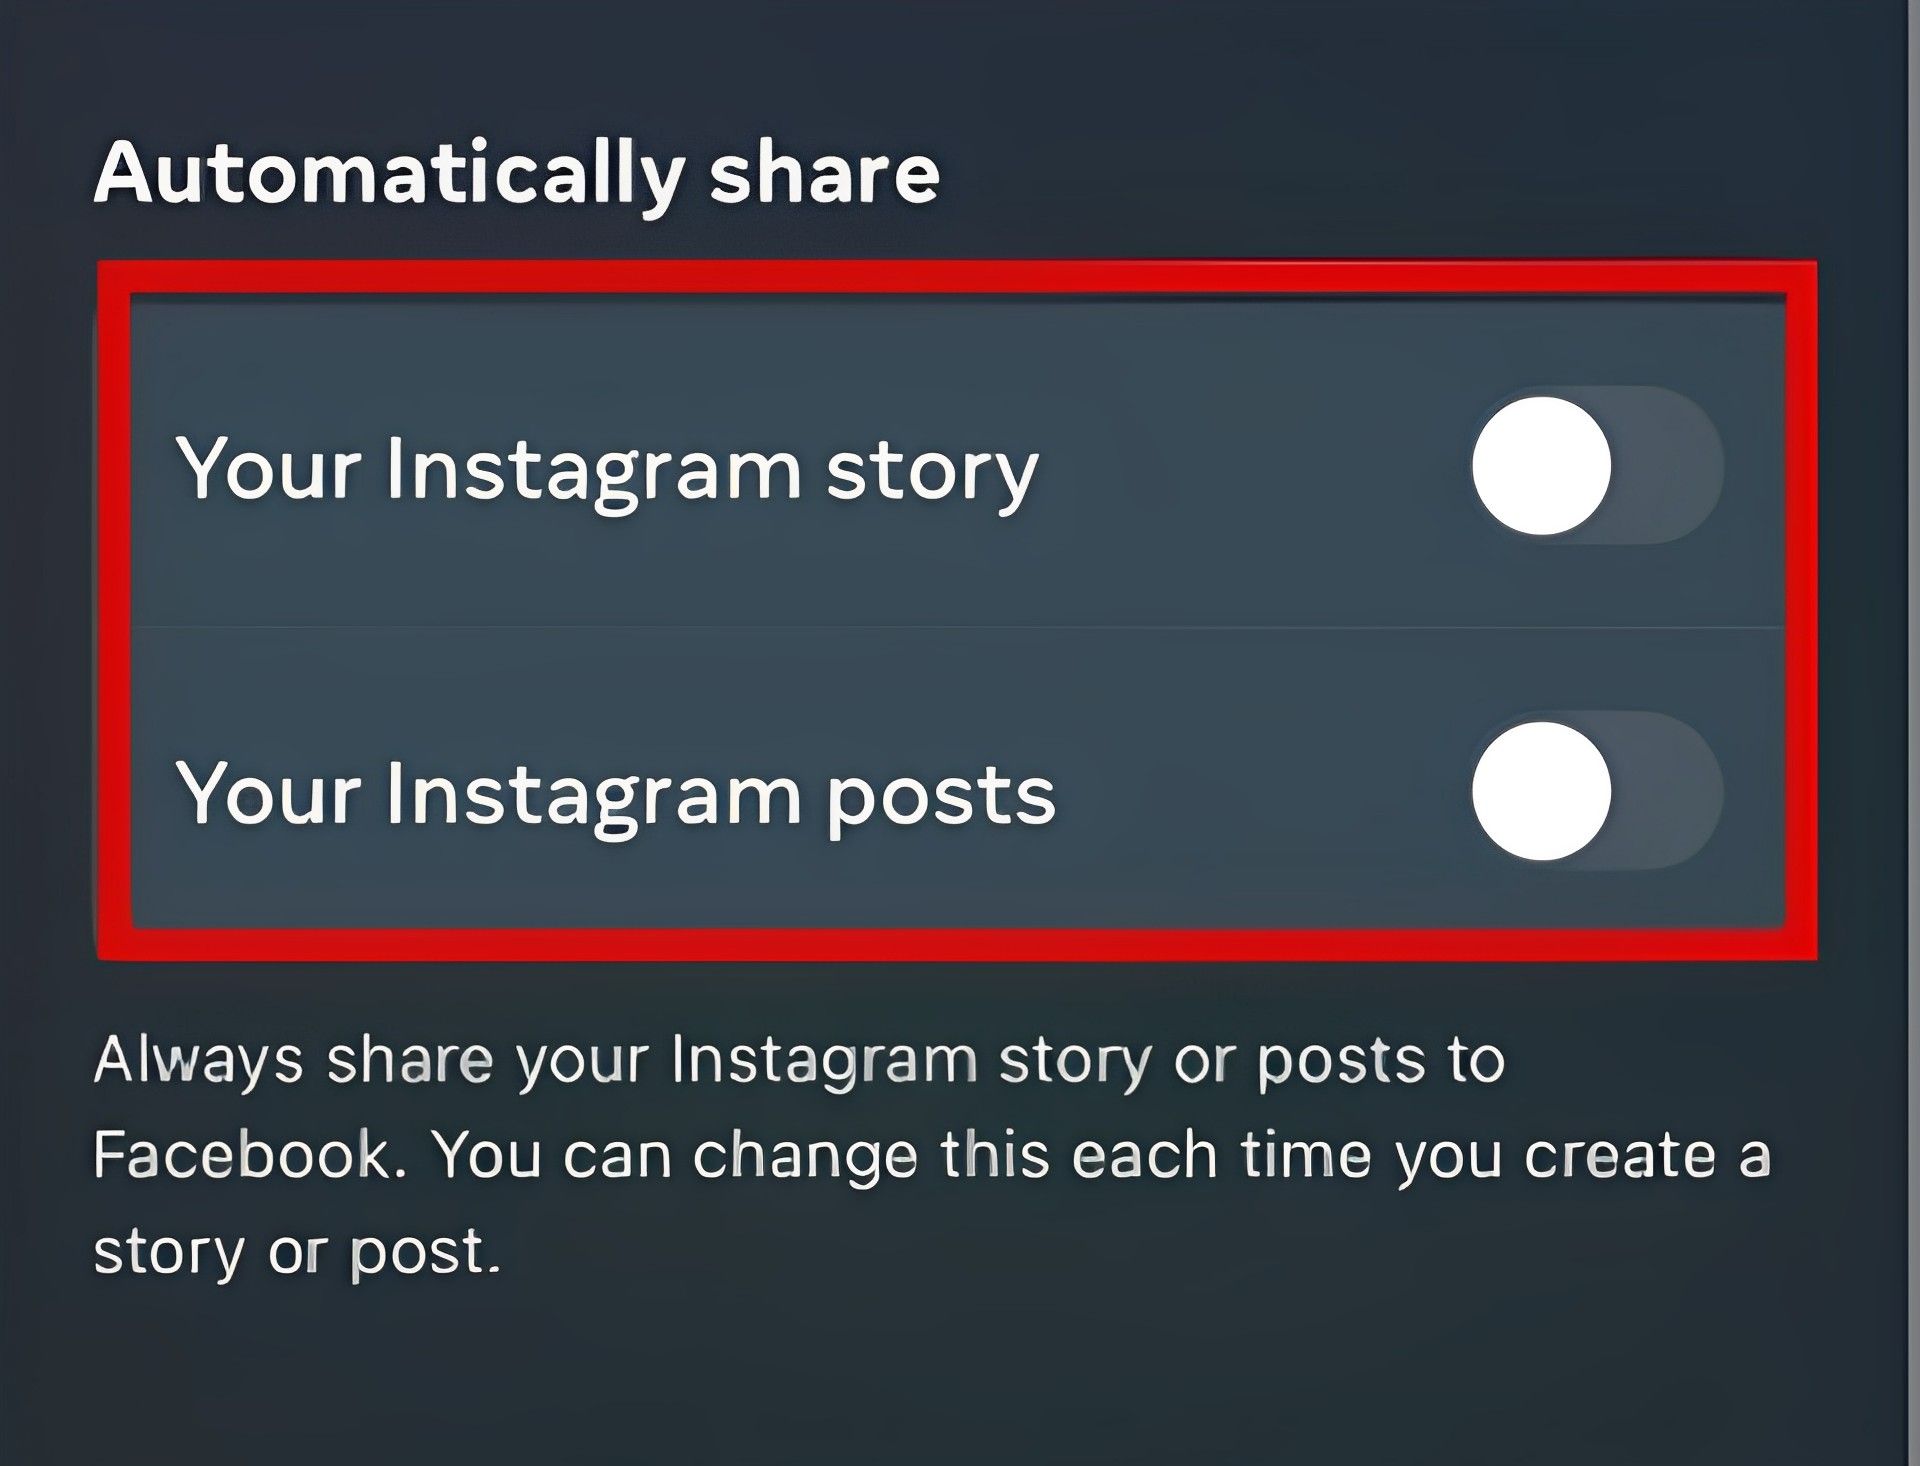 How to not share Instagram stories on Facebook